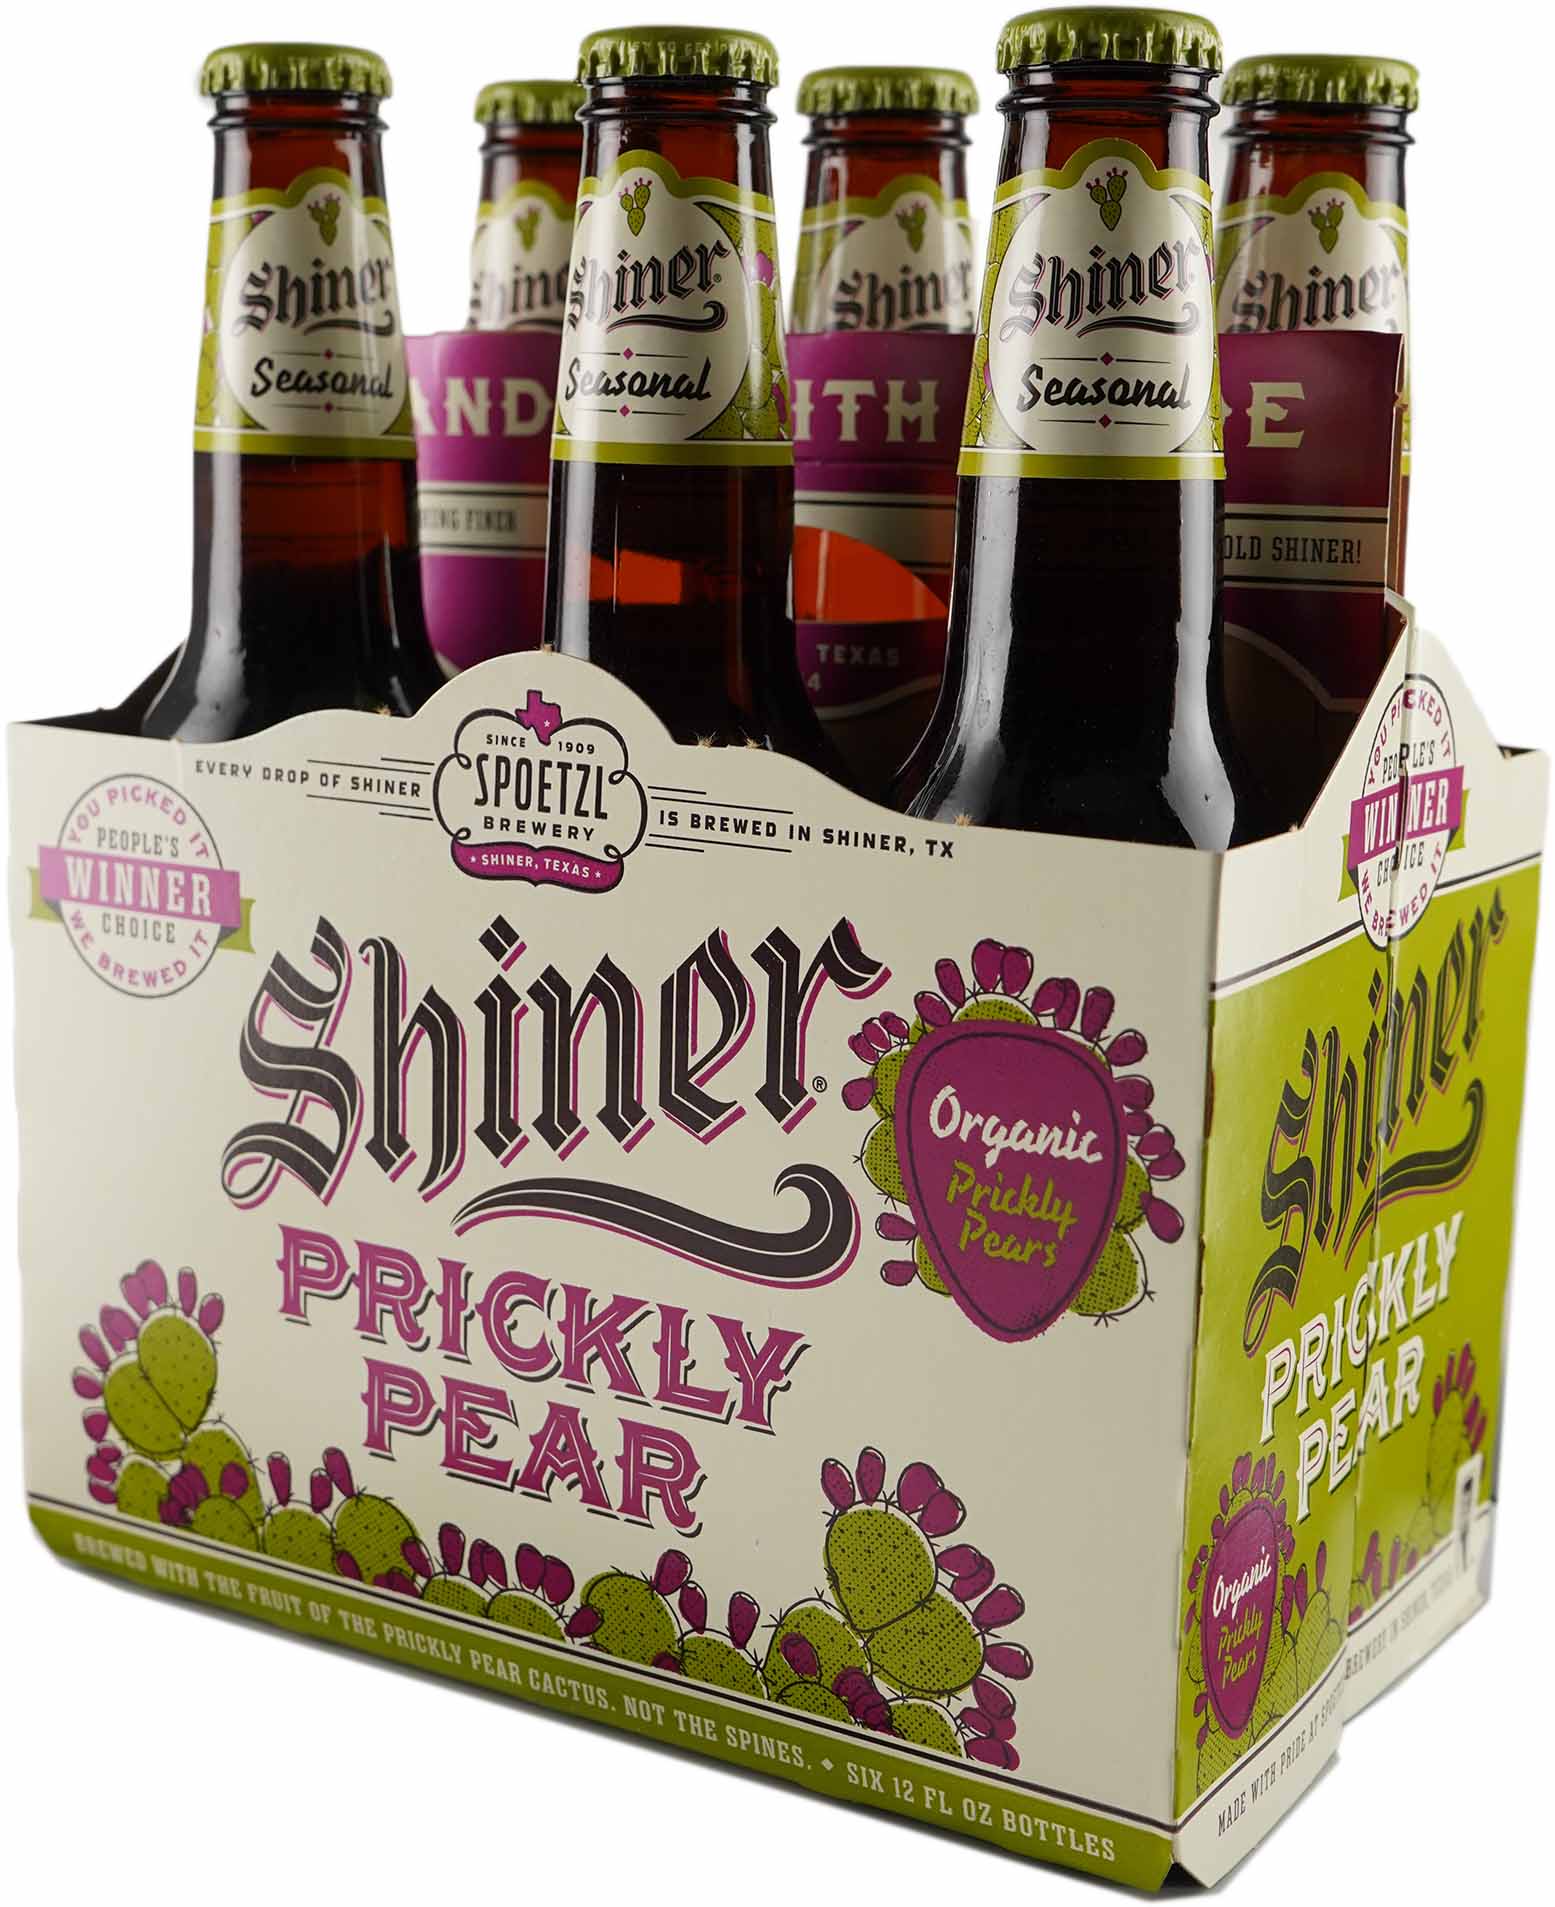 8 Shiner Prickly Pear Beer Caps/Crowns Free Standard Shipping!! 